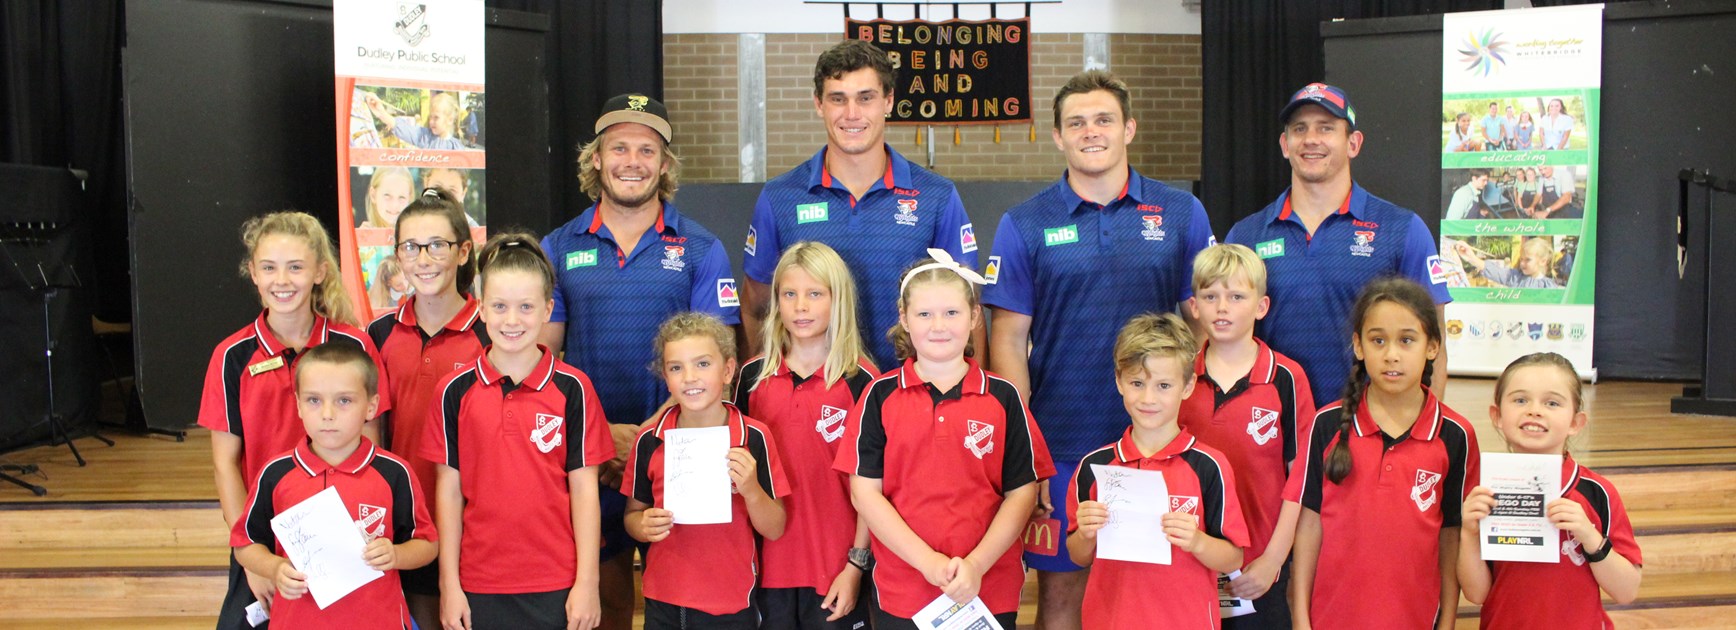 Newcastle Knights players at Dudley Public School.